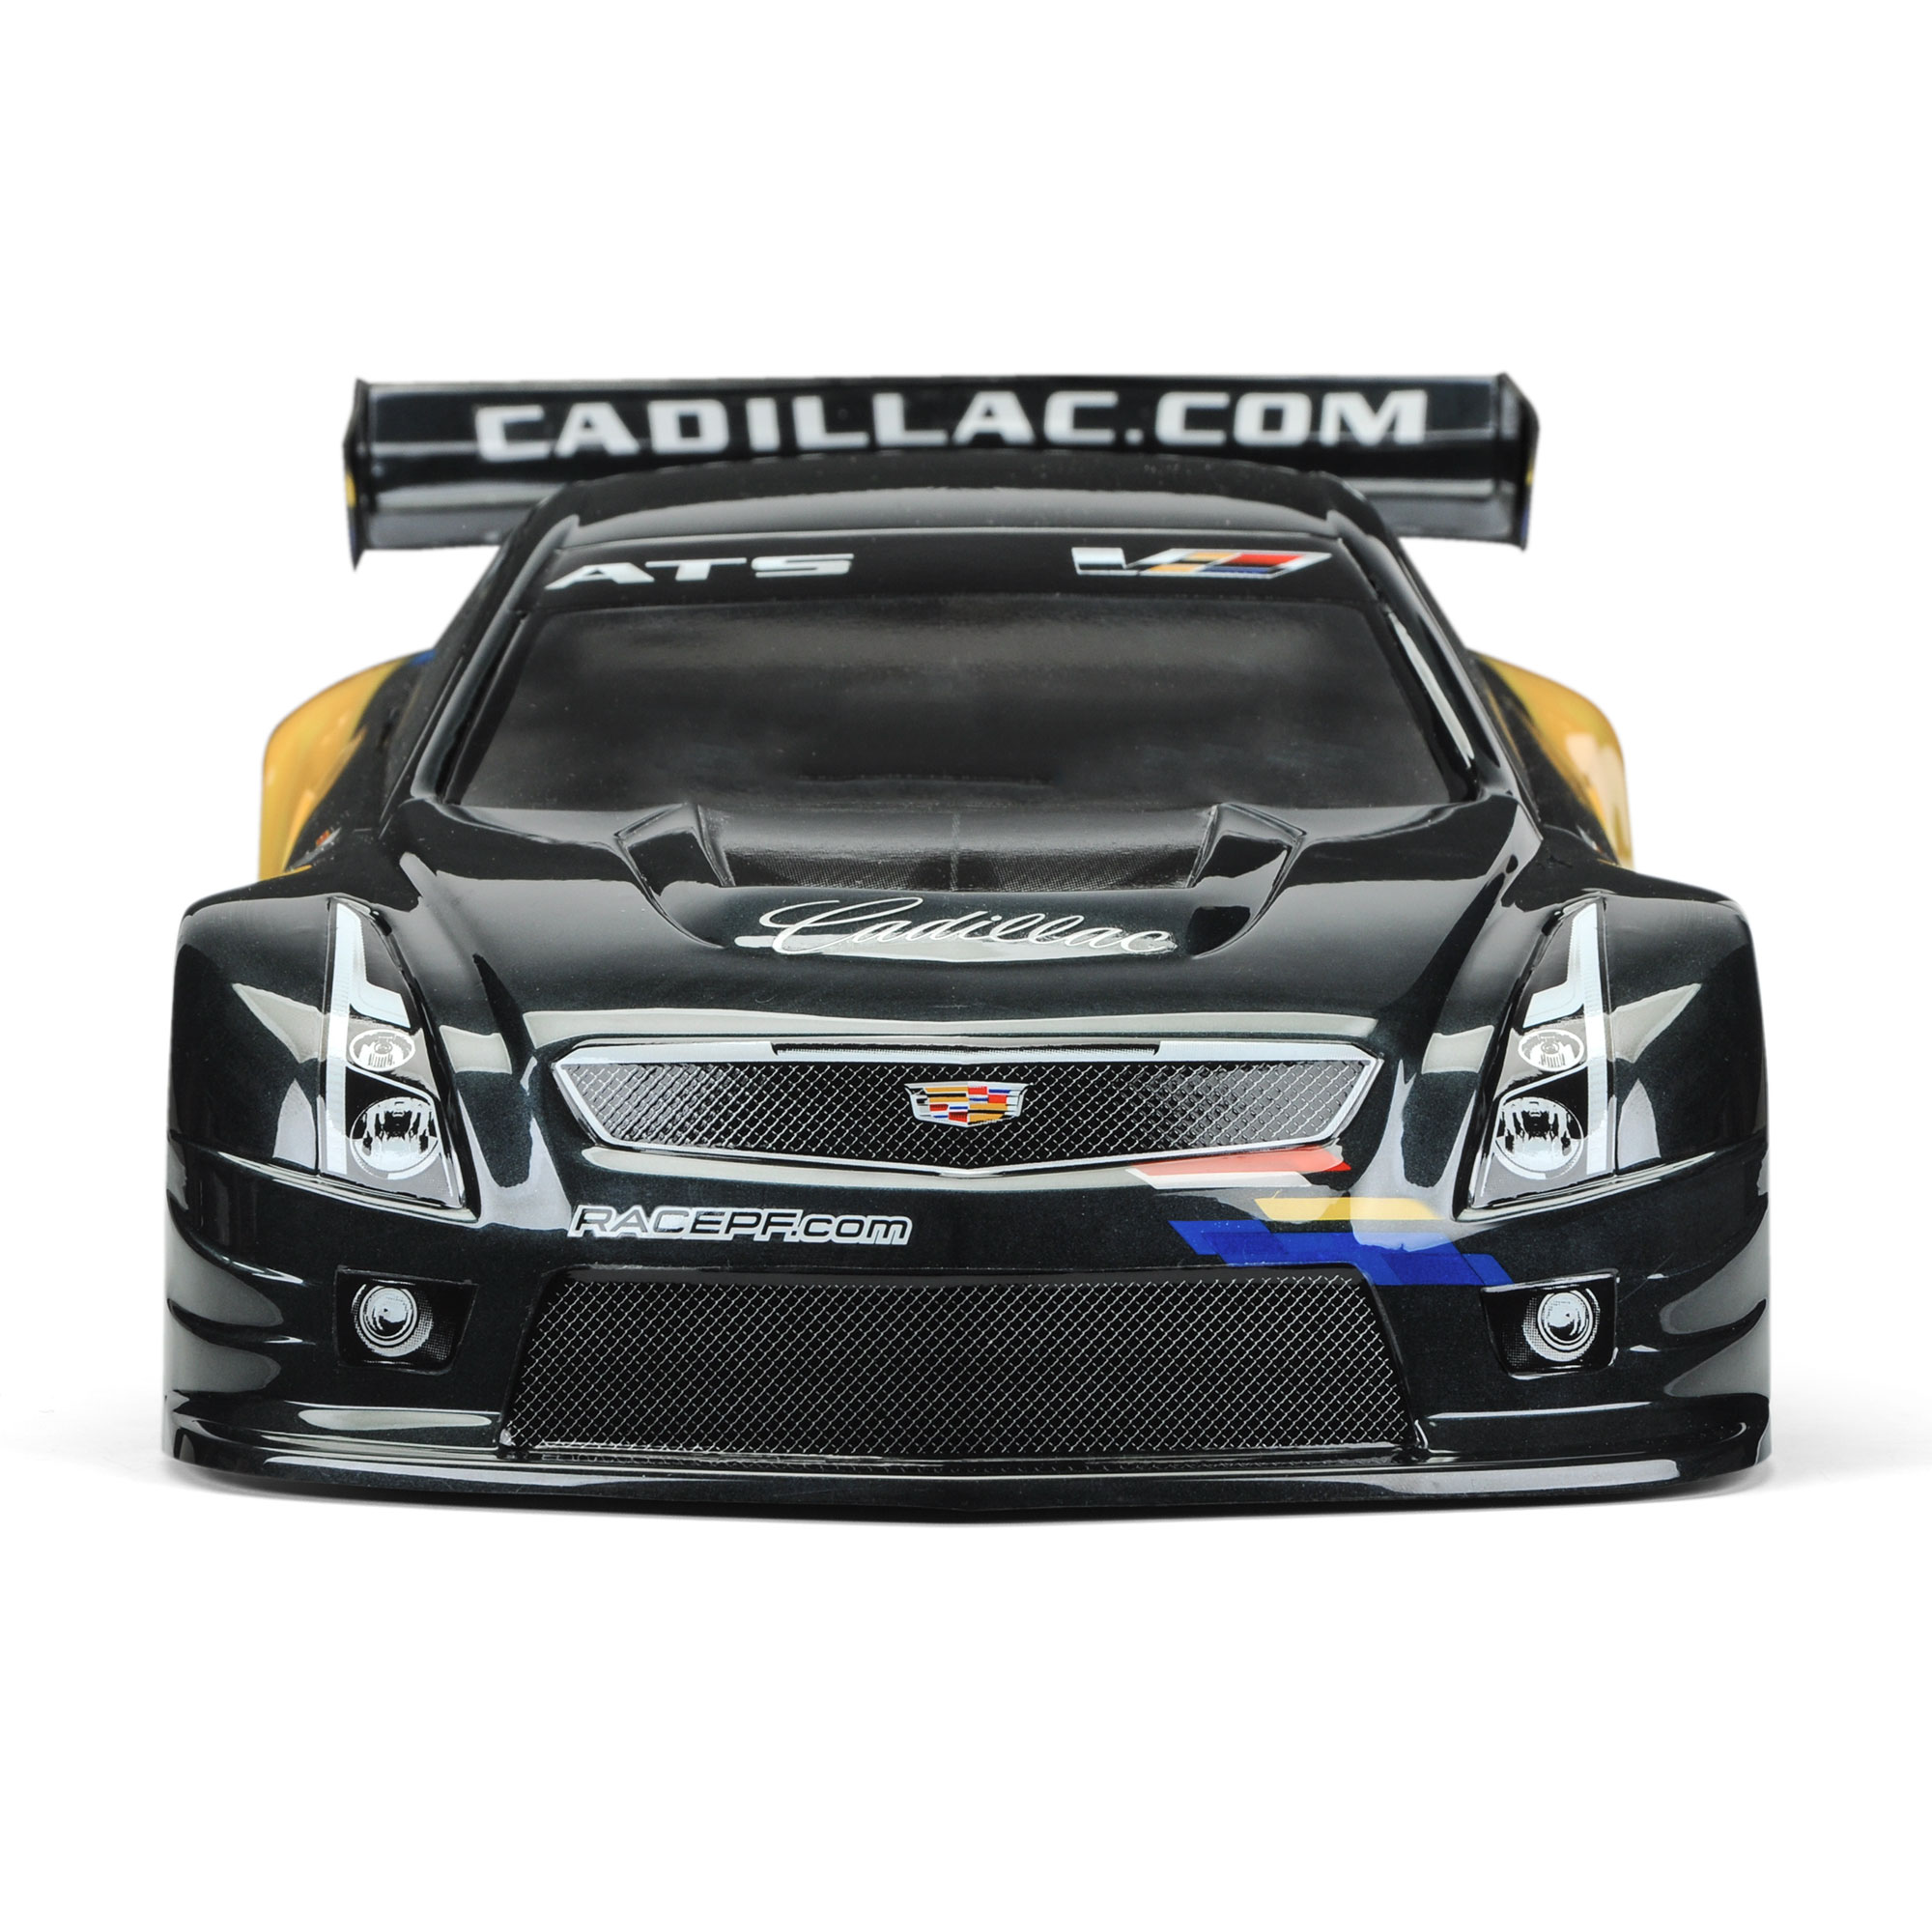 Pro-line Racing 1/10 Cadillac ATS-V.R Clear Body: 190mm Touring Car